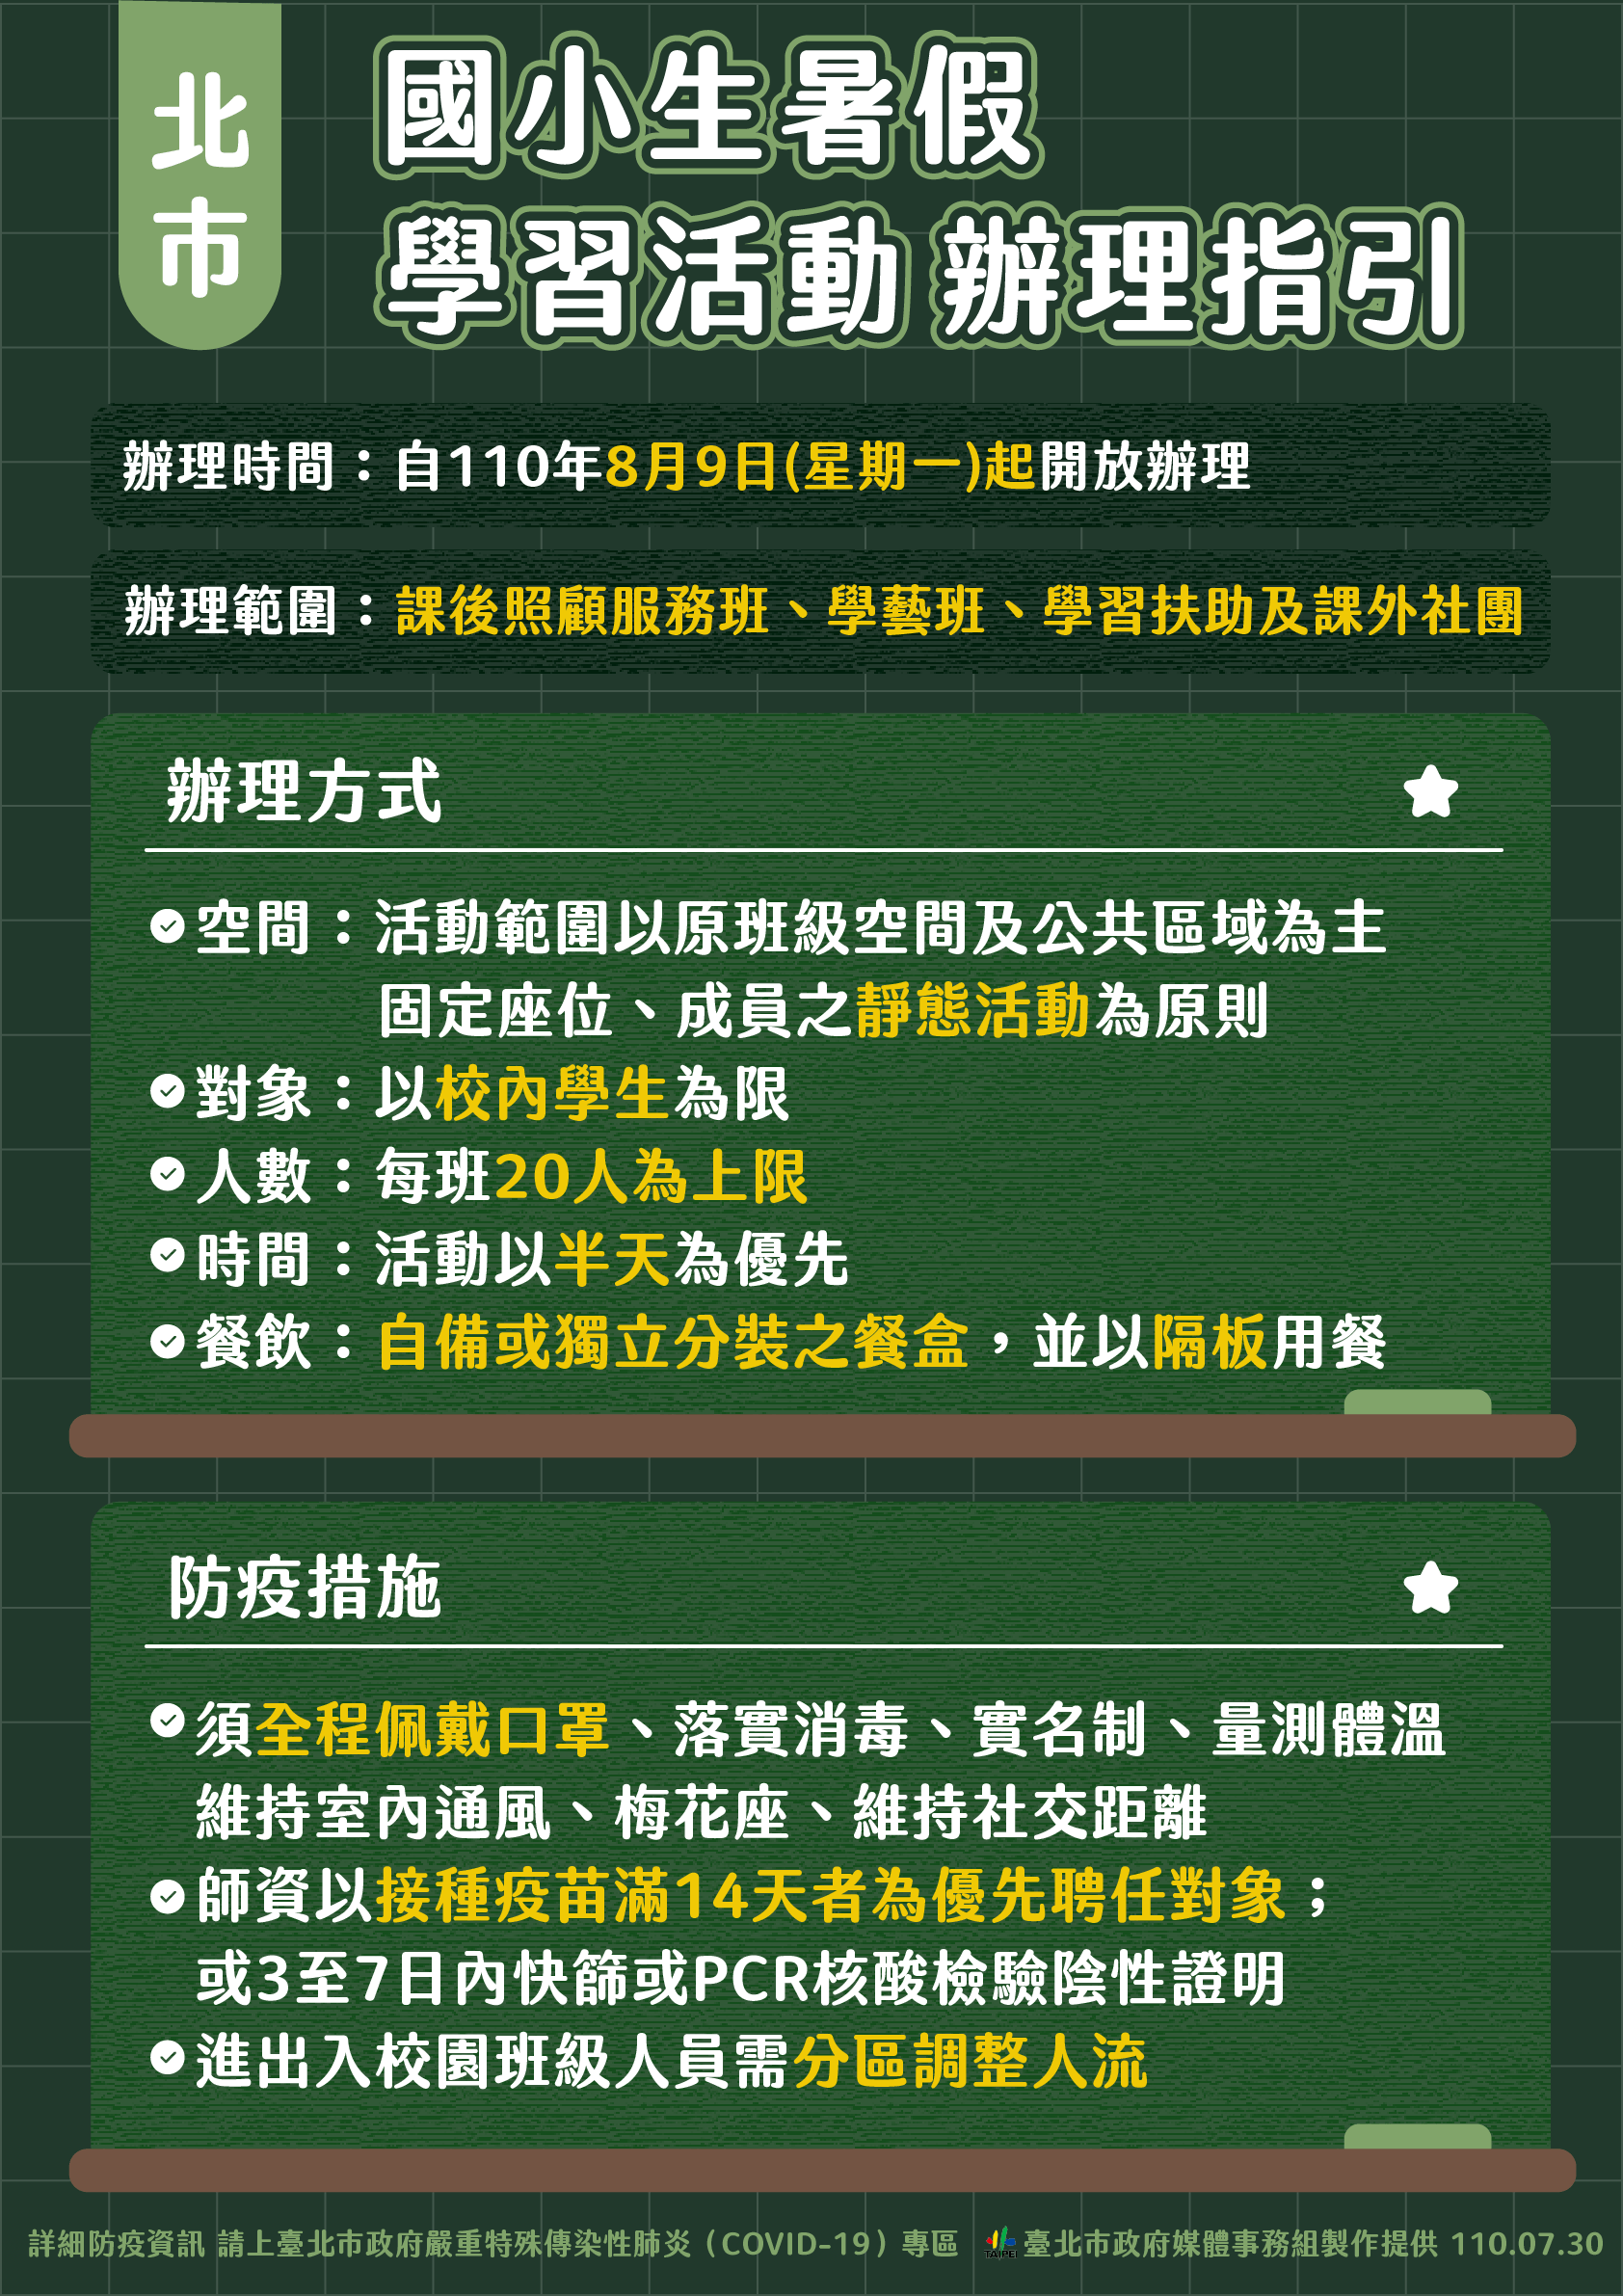 Guidelines for conducting summer activities for elementary students. (Photo / Provided by the Taipei City Government)